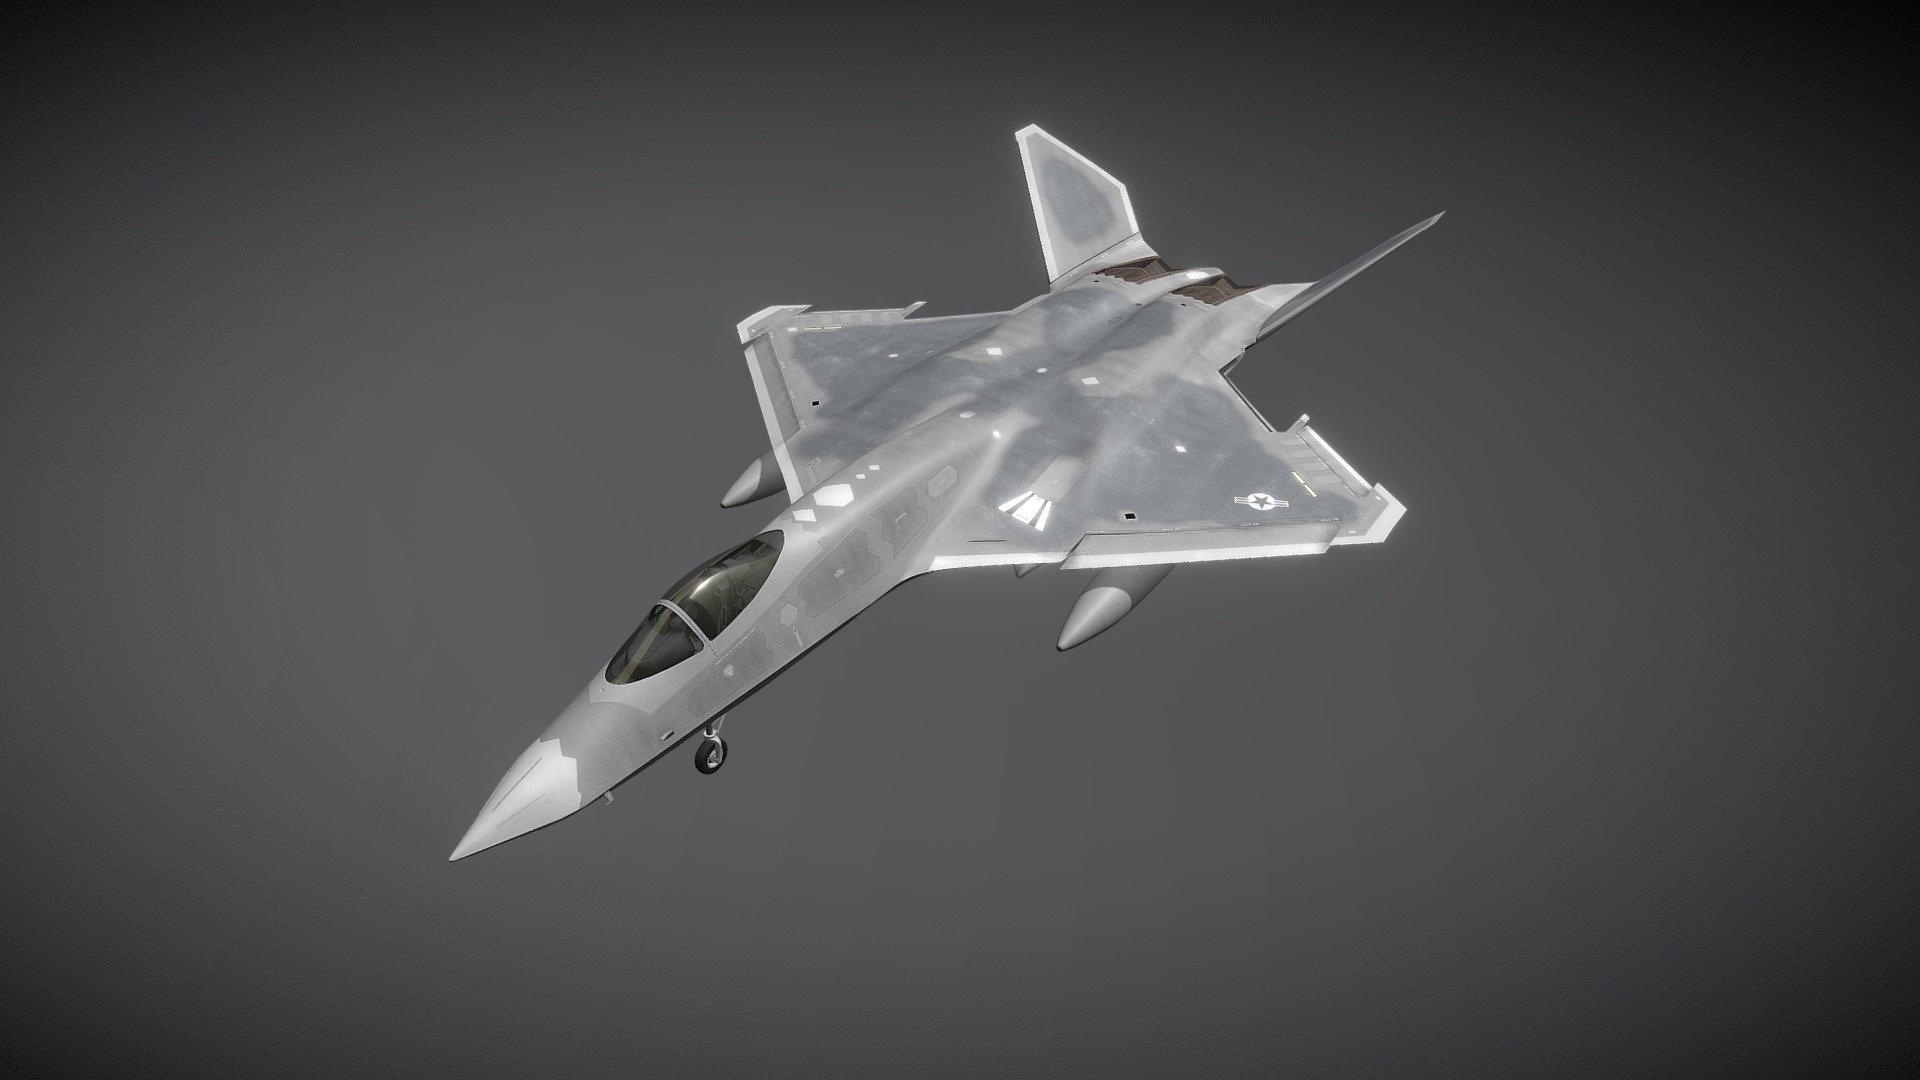 Theoretical production version of the F-23 Black Widow based off of Northrop Grumman production drawings 3d model